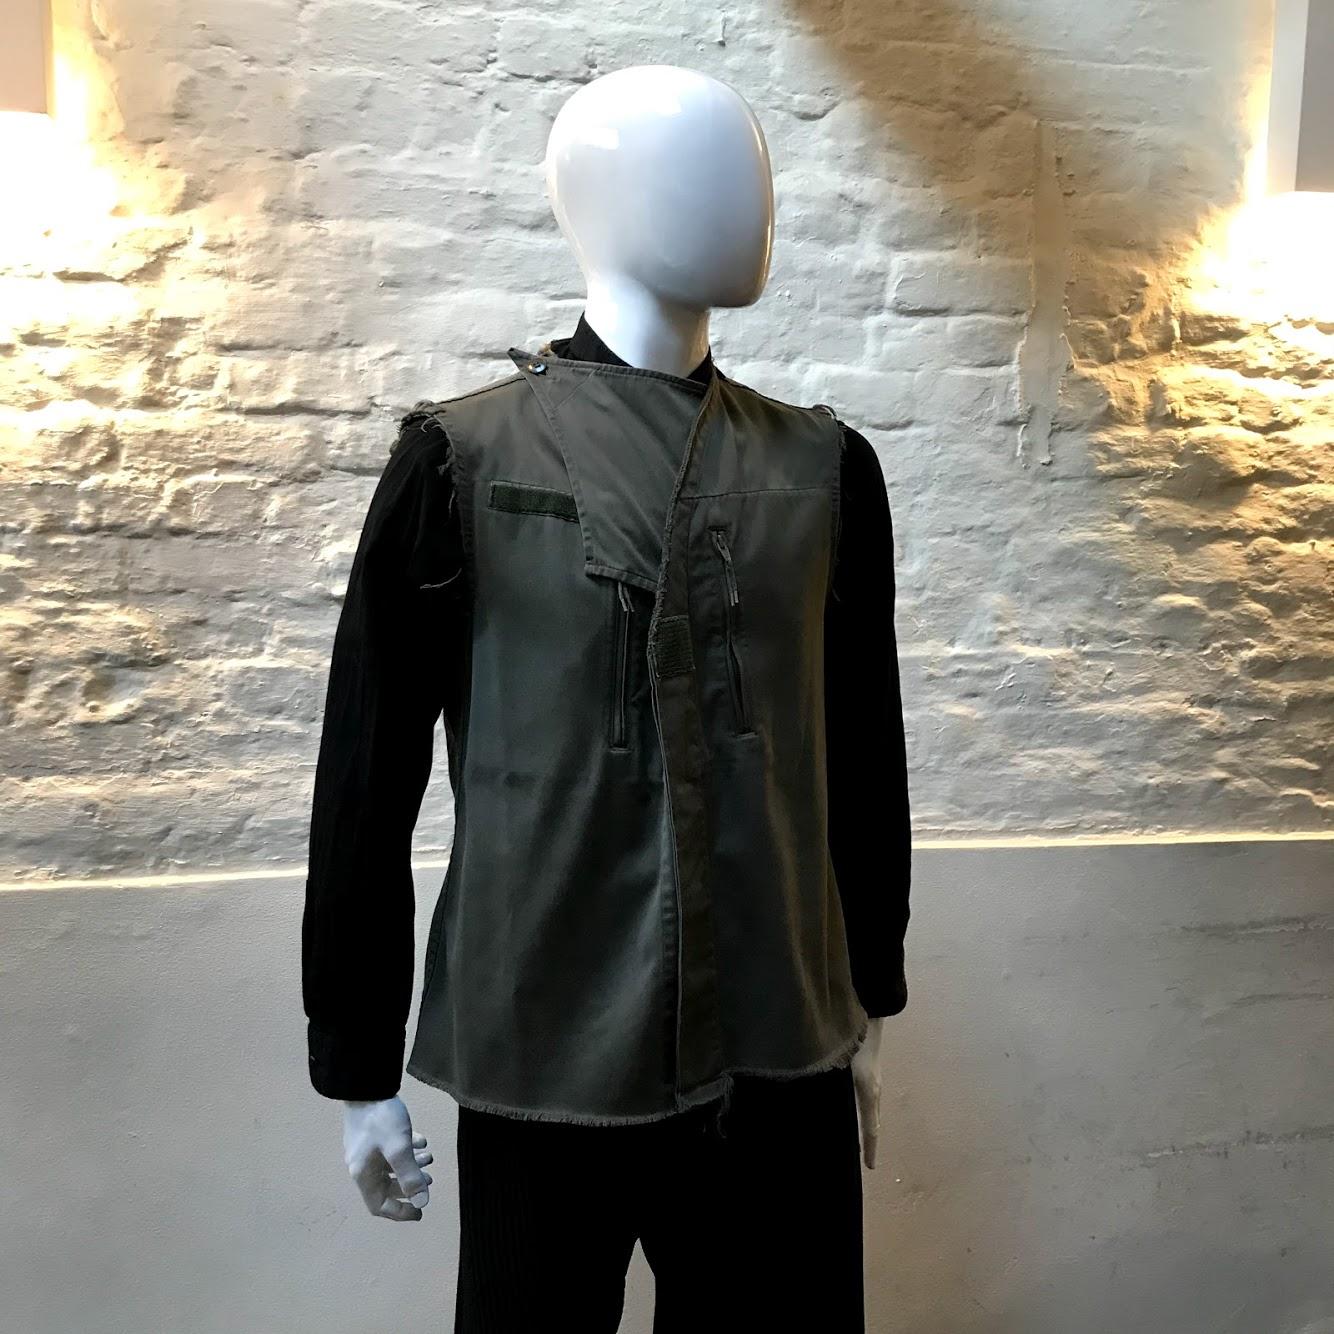 Maison Margiela Combat Style Waistcoat made in France from cotton. 

Maison Margiela is a French fashion House, founded in Paris in 1988 by Belgian designer Martin Margiela. Both masculine and feminine, oftentimes fusing the two genders, the House